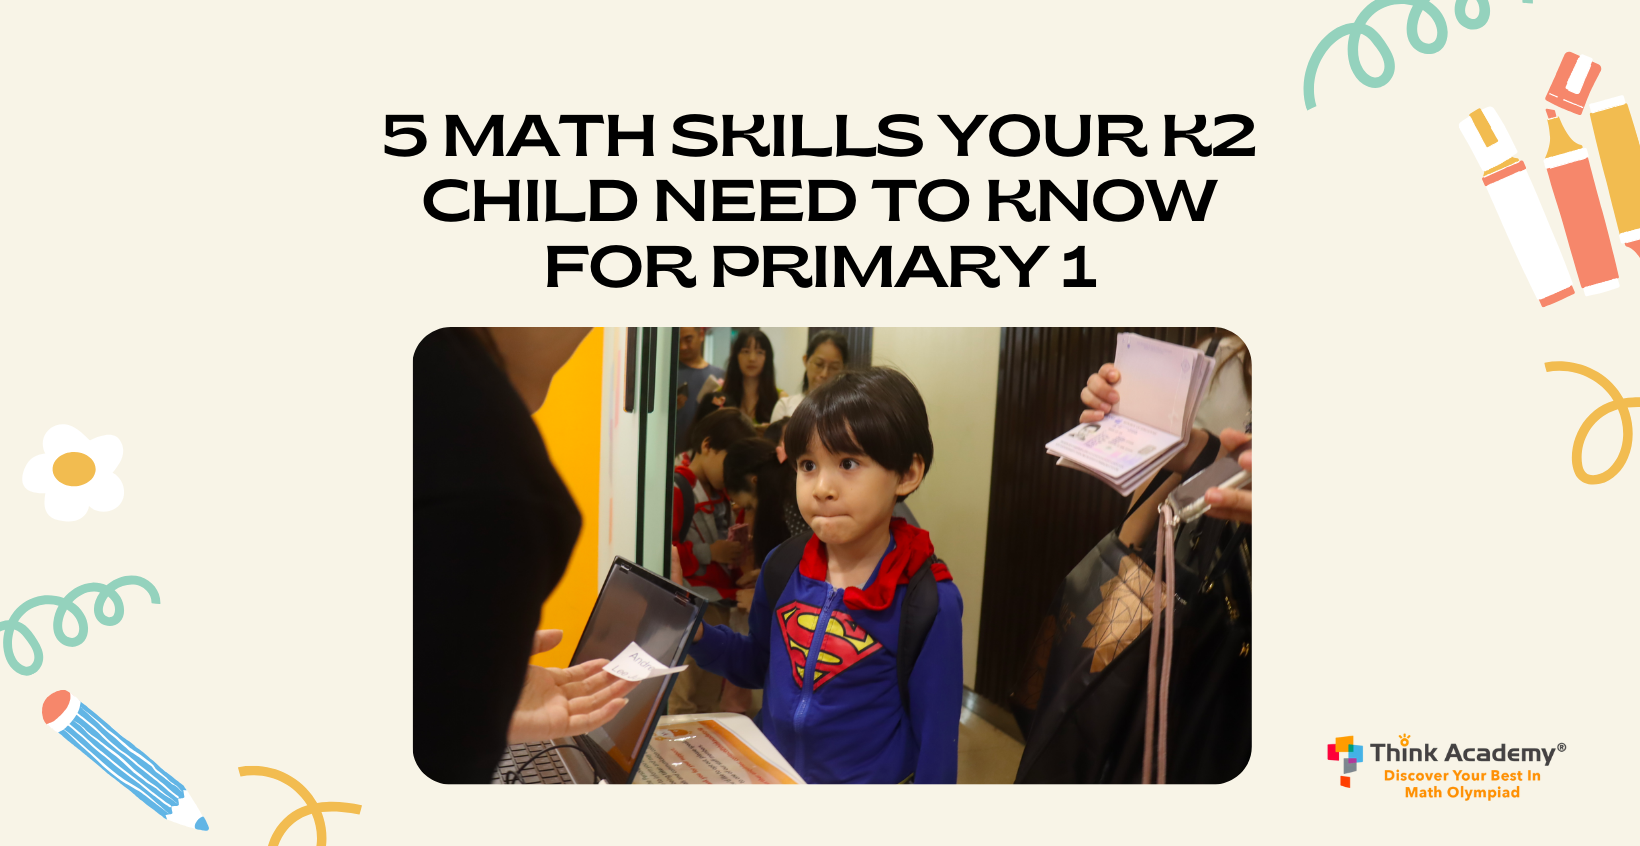 5 Math Skills Your K2 Child Needs To Know for Primary 1